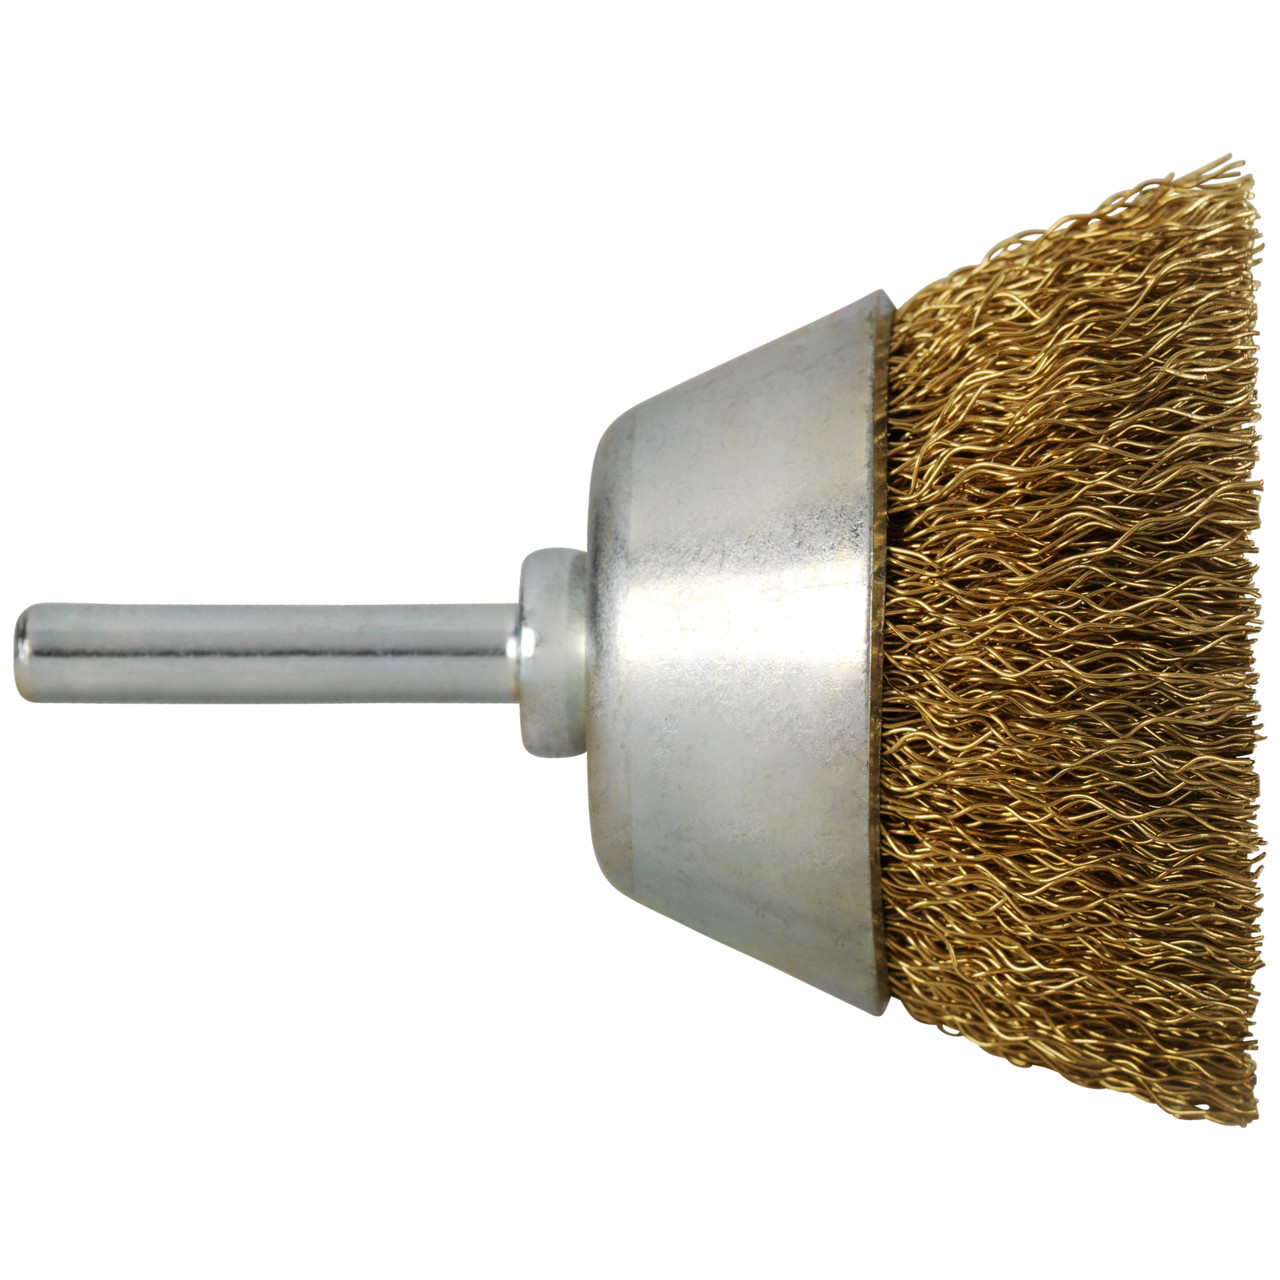 Tyrolit Cup shaft brushes DxLxH-GExI 60x15x20-6x30 For non-ferrous metals, shape: 52TDW - (cup shaft brushes), Art. 23469